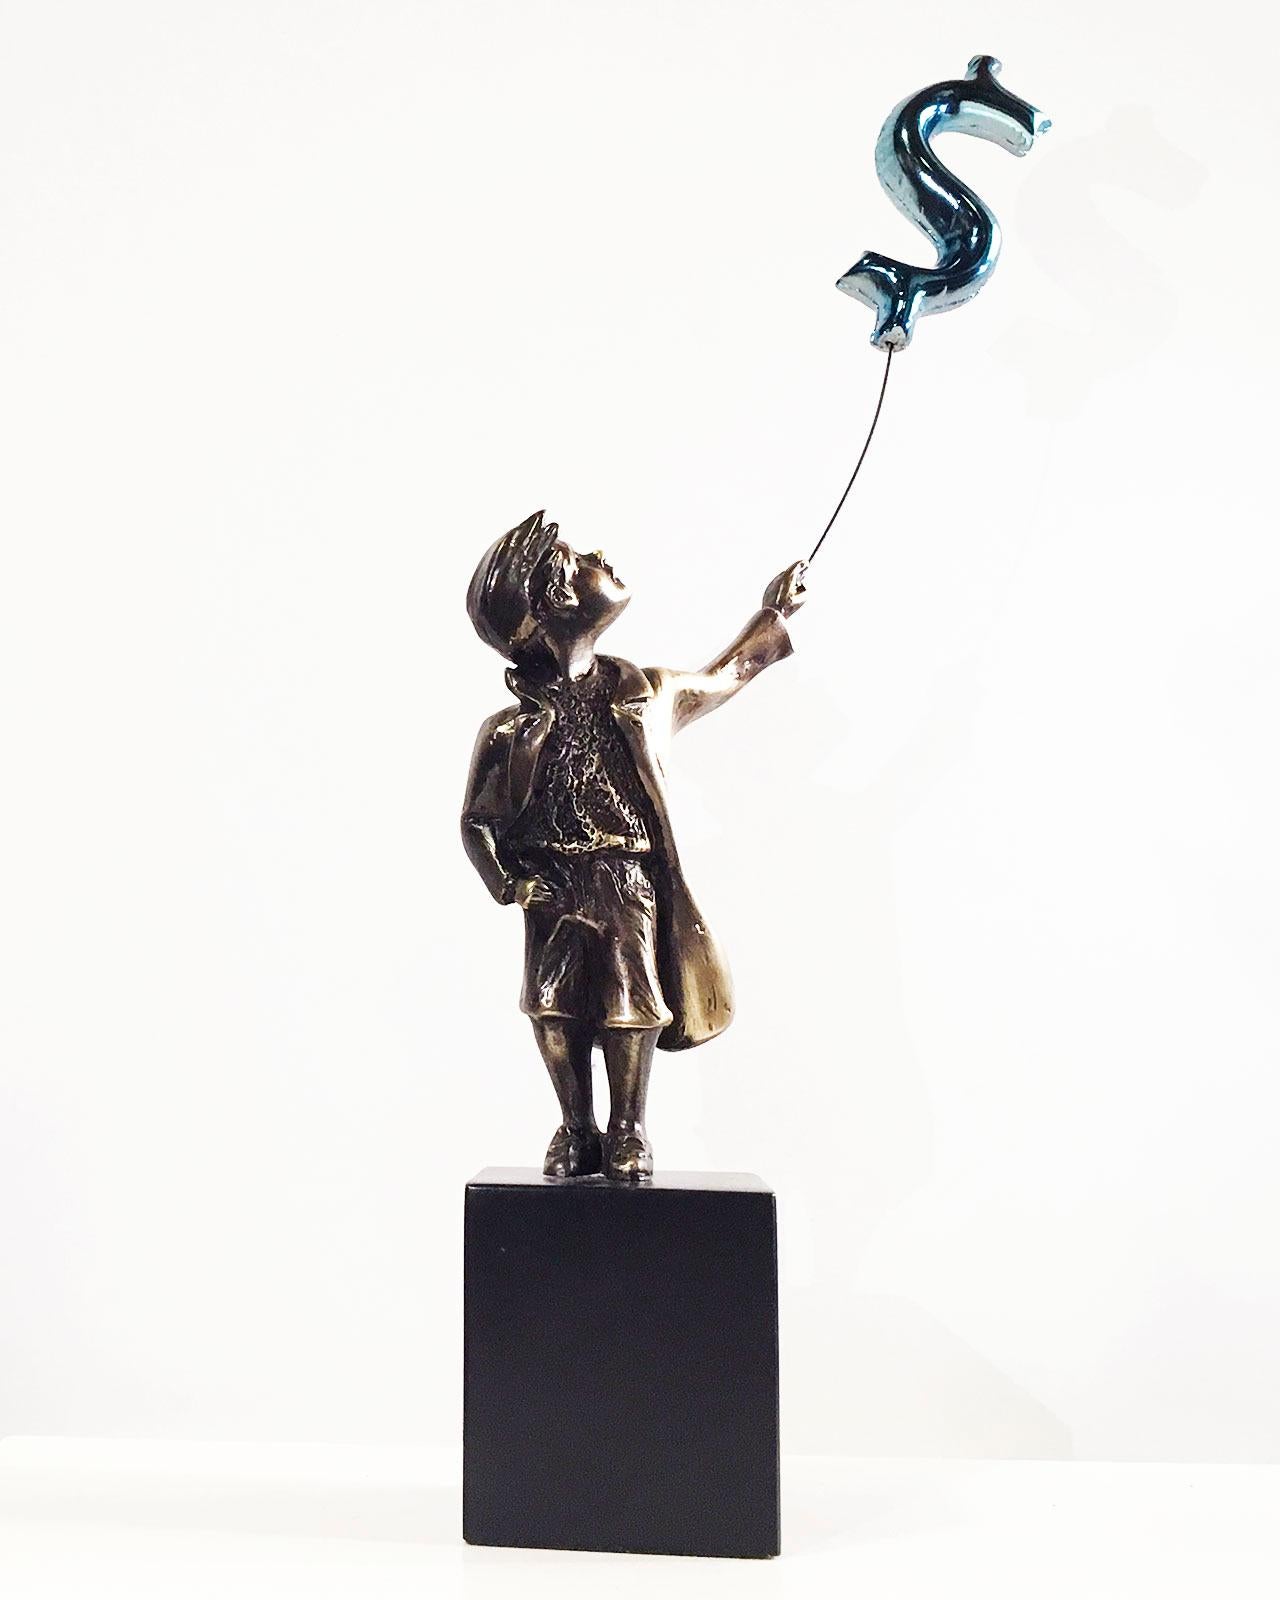 Street Art Sculpture "Child with balloon dollar Big" by Miguel Guía.
This sculpture is made by lost wax bronze casting.
Limited edition of 199 works.
Although the required time to deliver a shipment is usually between 3 and 10 days please do not